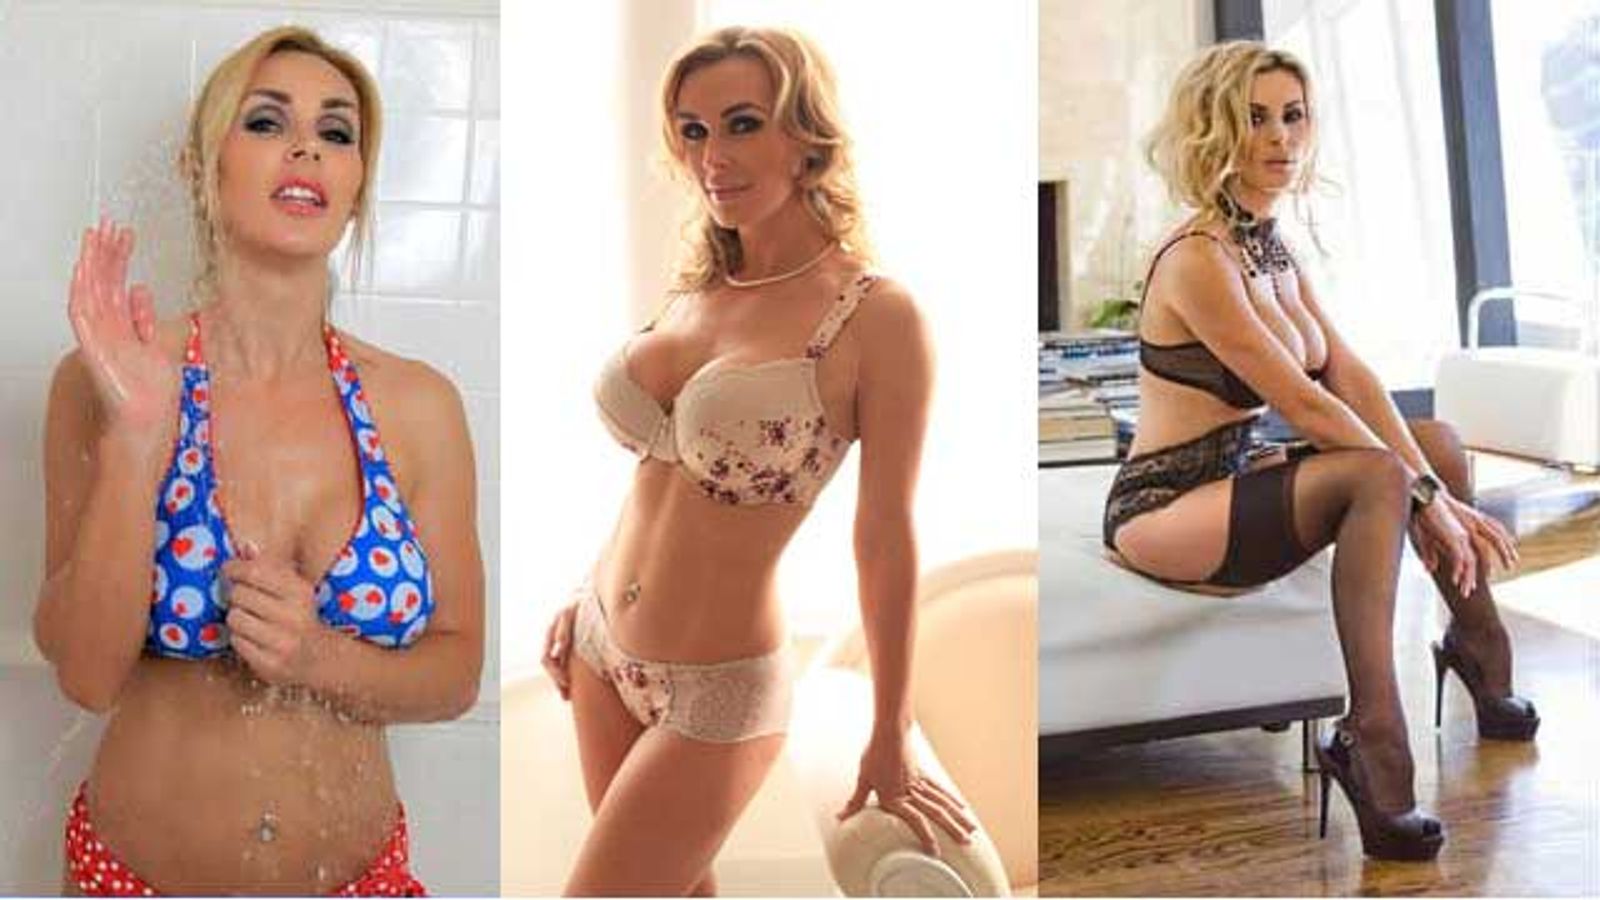 Tanya Tate Nom'd For MILF of the Year and Mainstream Crossover